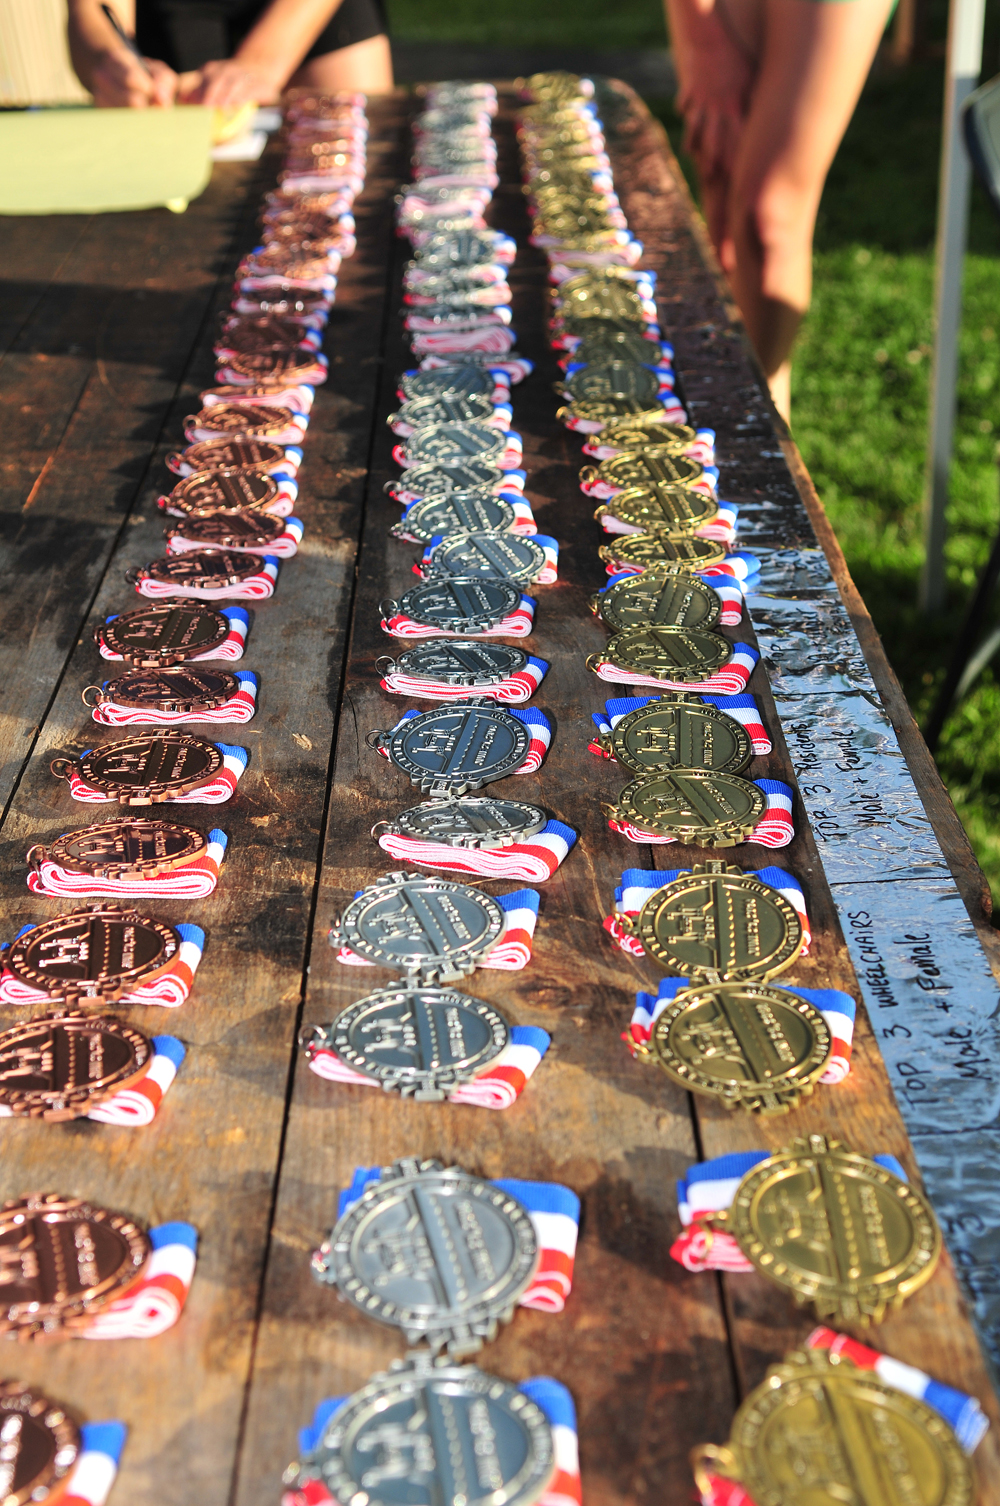 The many medals handed out at the 35th annual Shelter Island 10K Saturday. (Credit: Bill Landon)